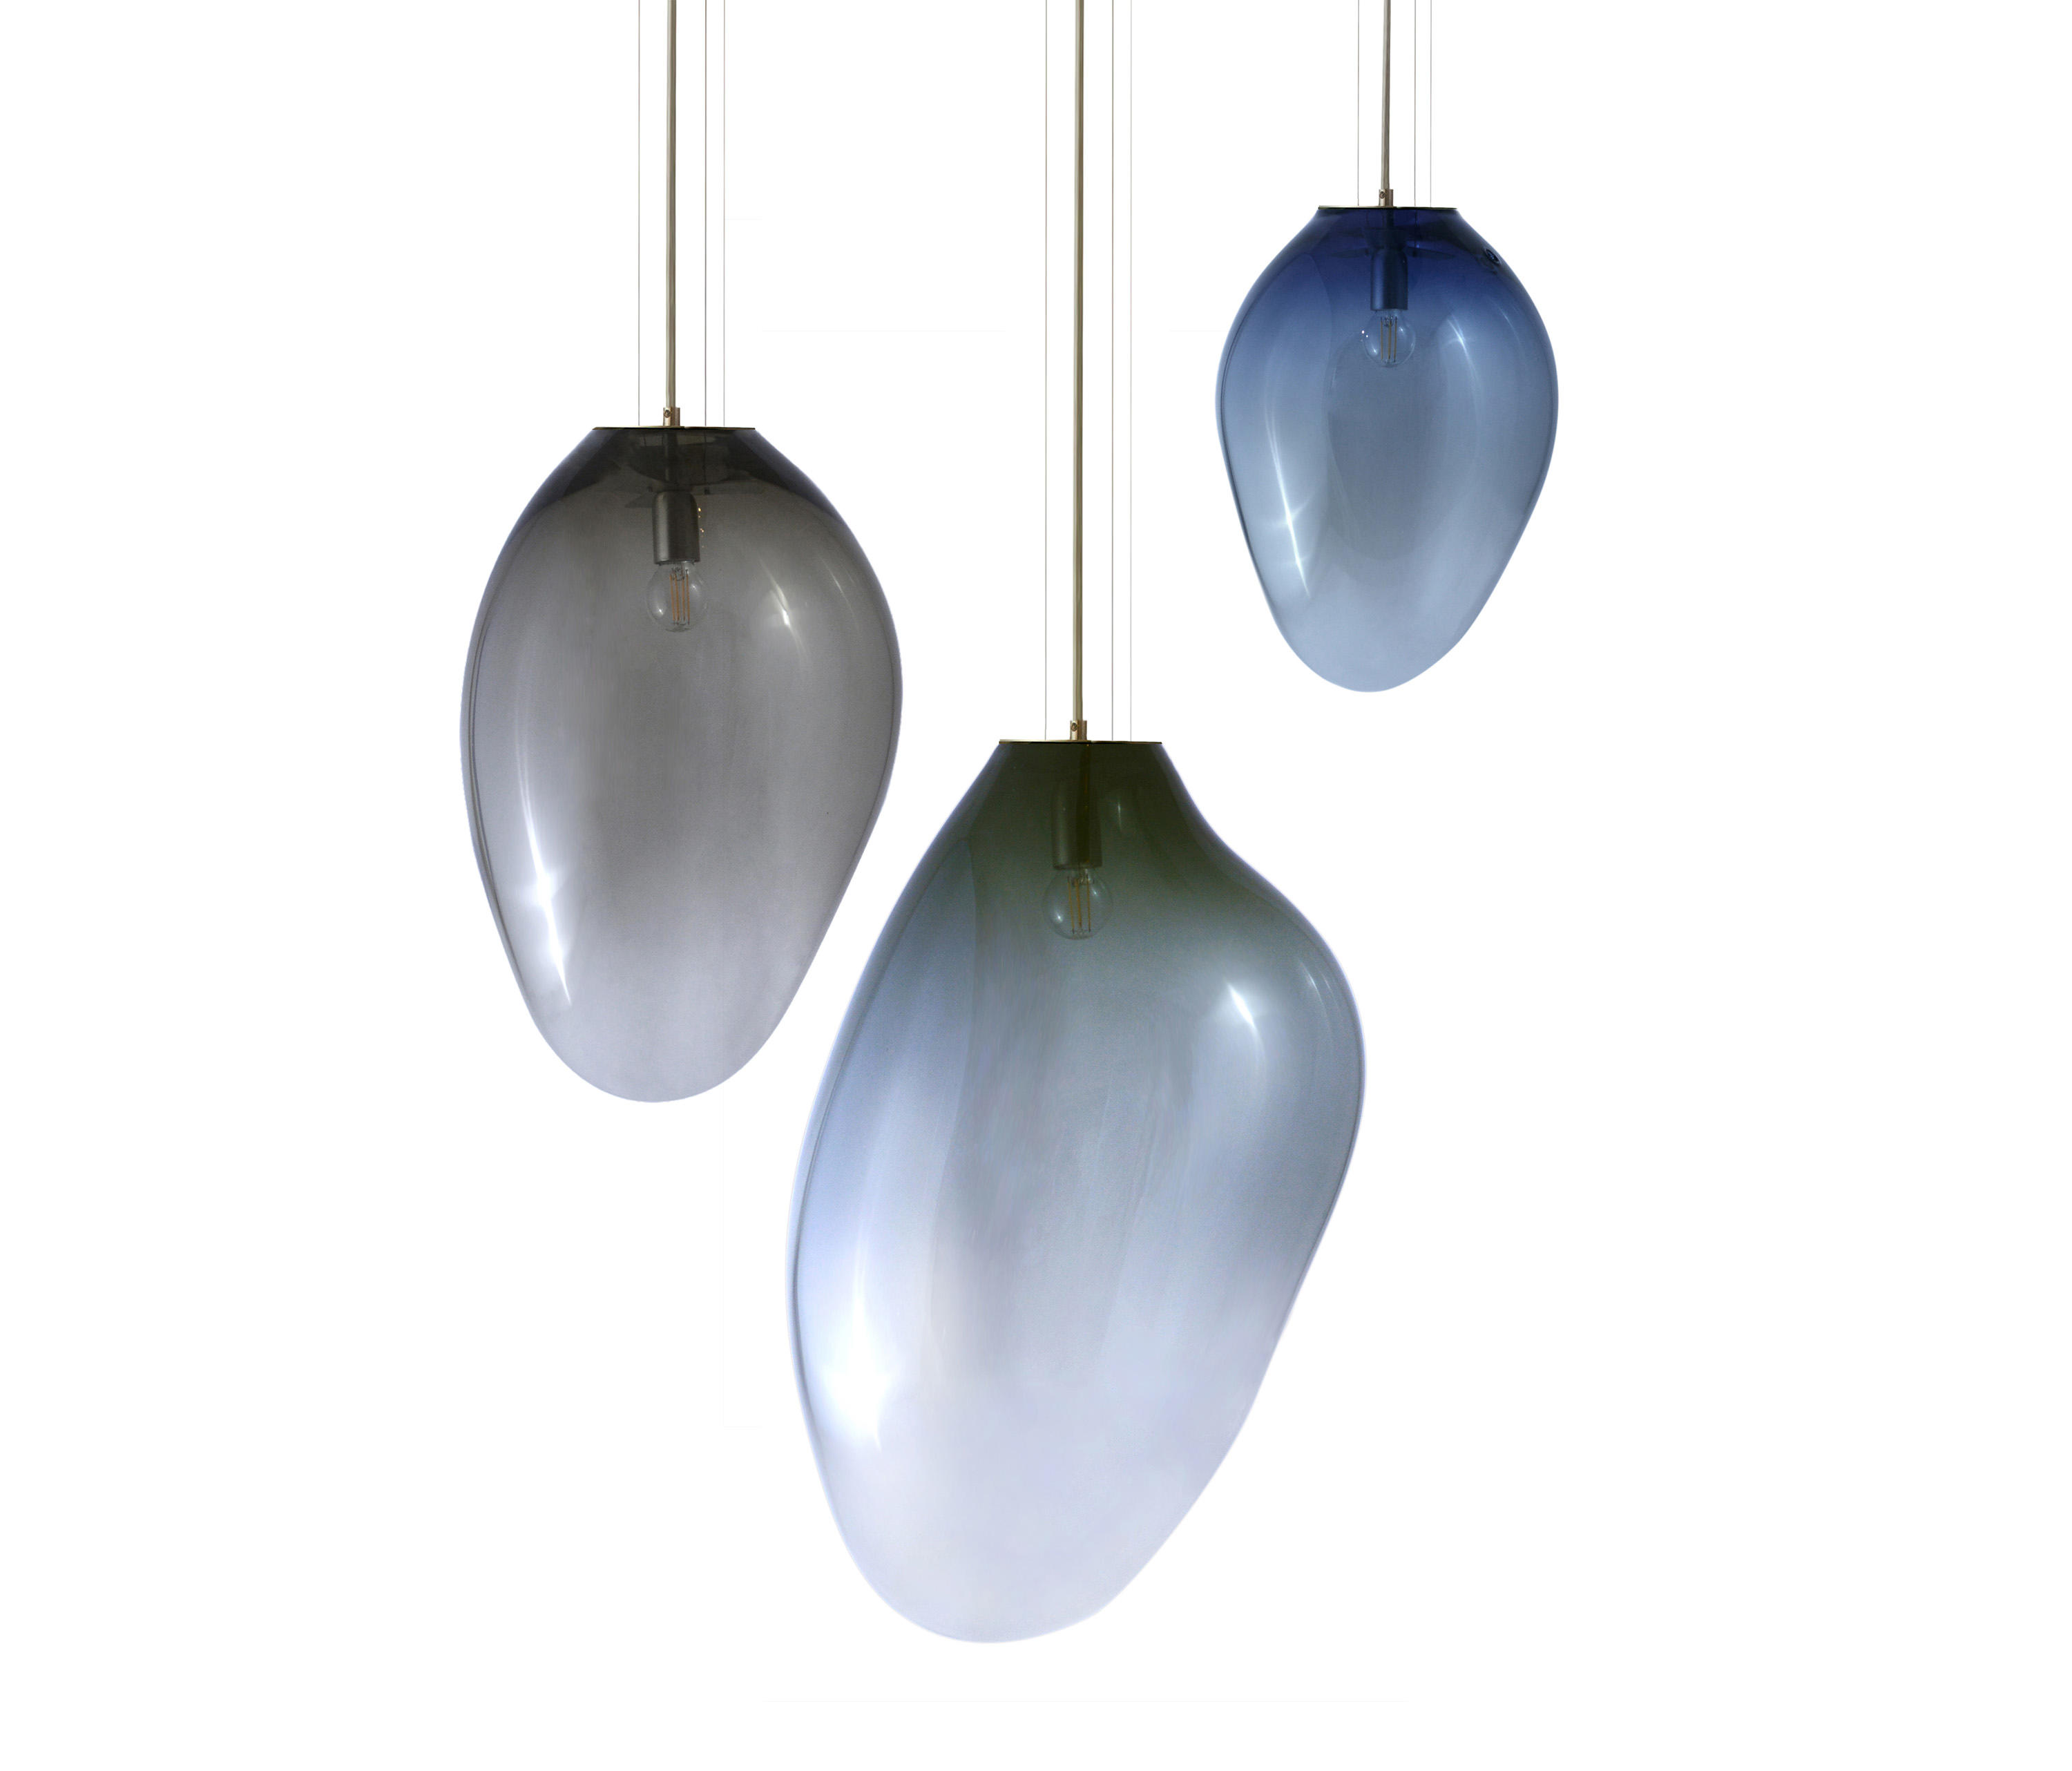 CERES - Suspended lights from ELOA | Architonic | Pendelleuchten